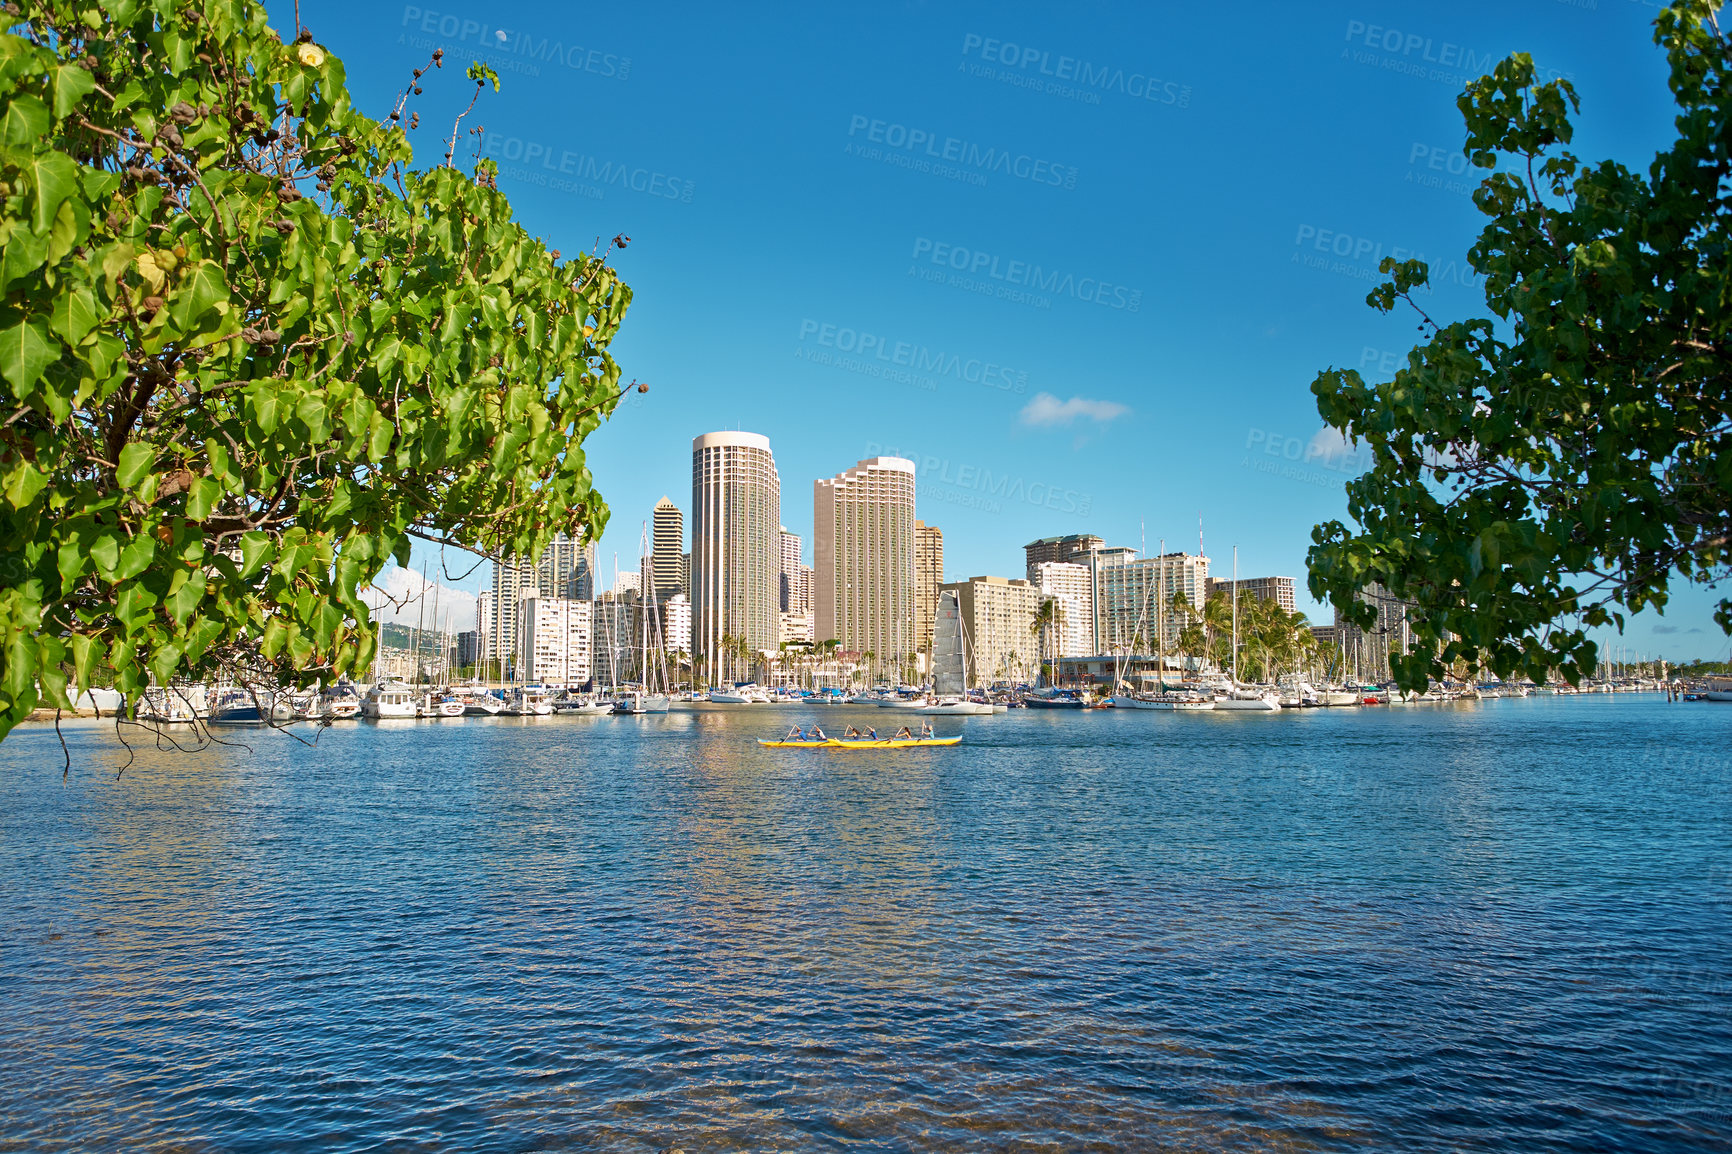 Buy stock photo Apartments or business district beside a beach on a sunny day with a cloudy blue sky and trees framing copyspace. Popular summer vacation tourist location in Hawaii. Luxury resort by ocean in the USA